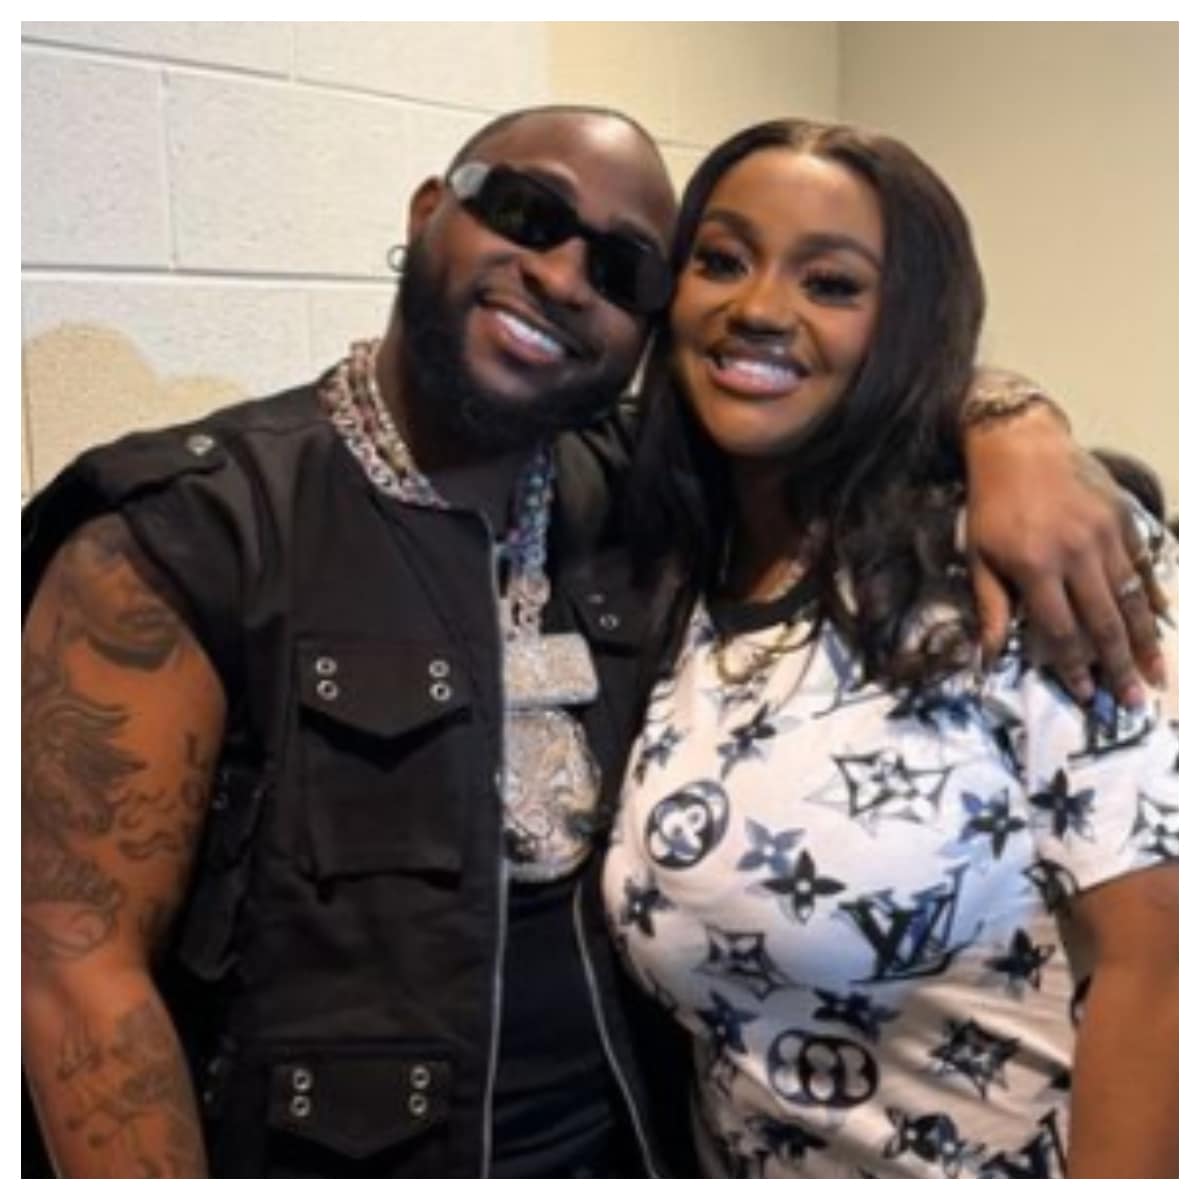 Tunde Ednut breaks down N250 million outfit Chioma wore to Davido's AWAY concert